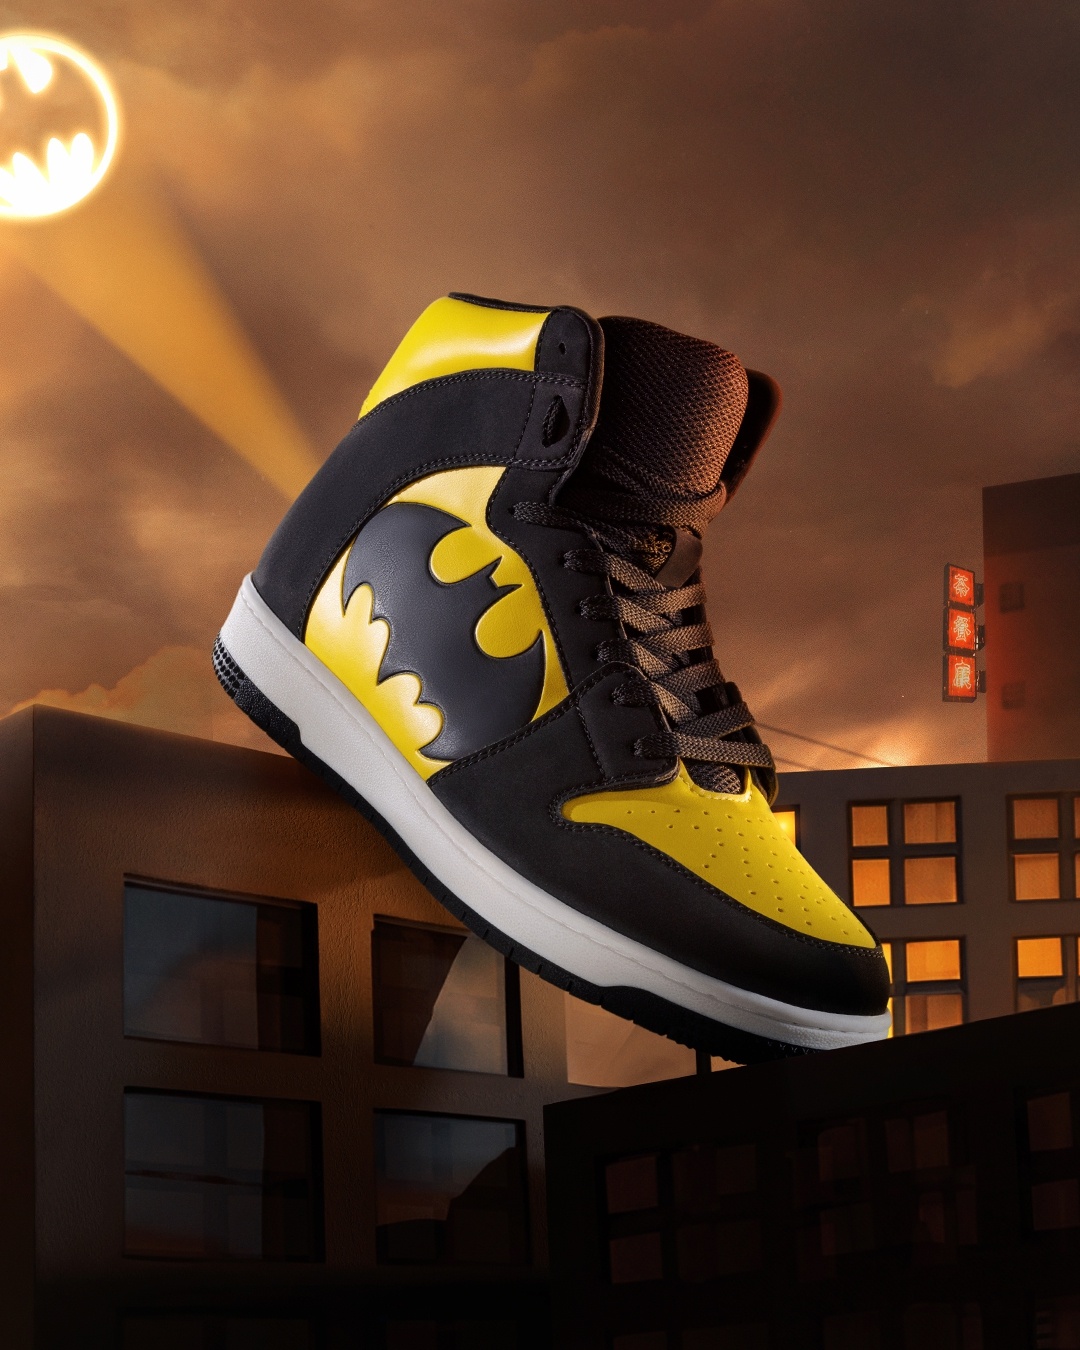 blue or black jeans paired with Men's Black & Yellow Dark Knight Color Block High Top Sneakers